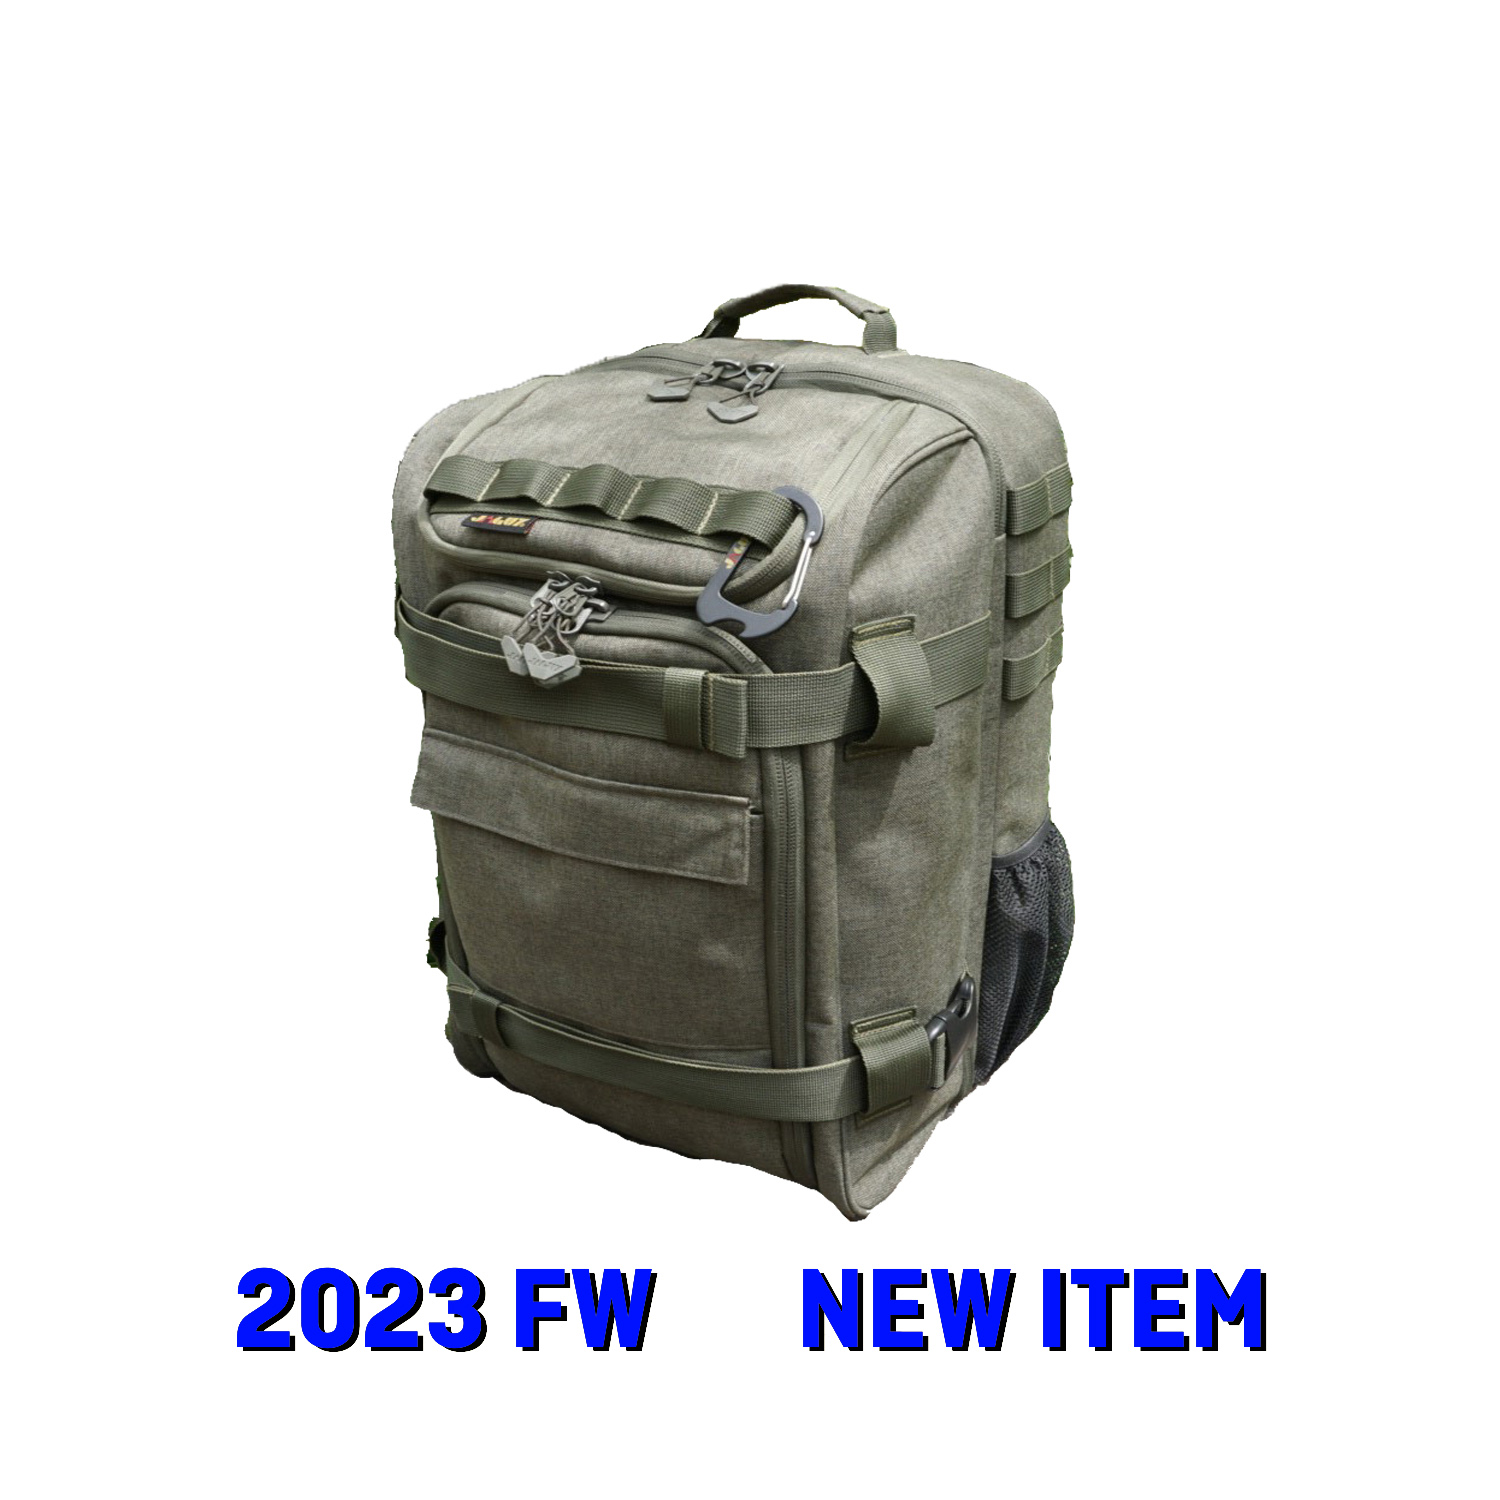 ALL IN ONE 3 WAY GEAR BAG 35L